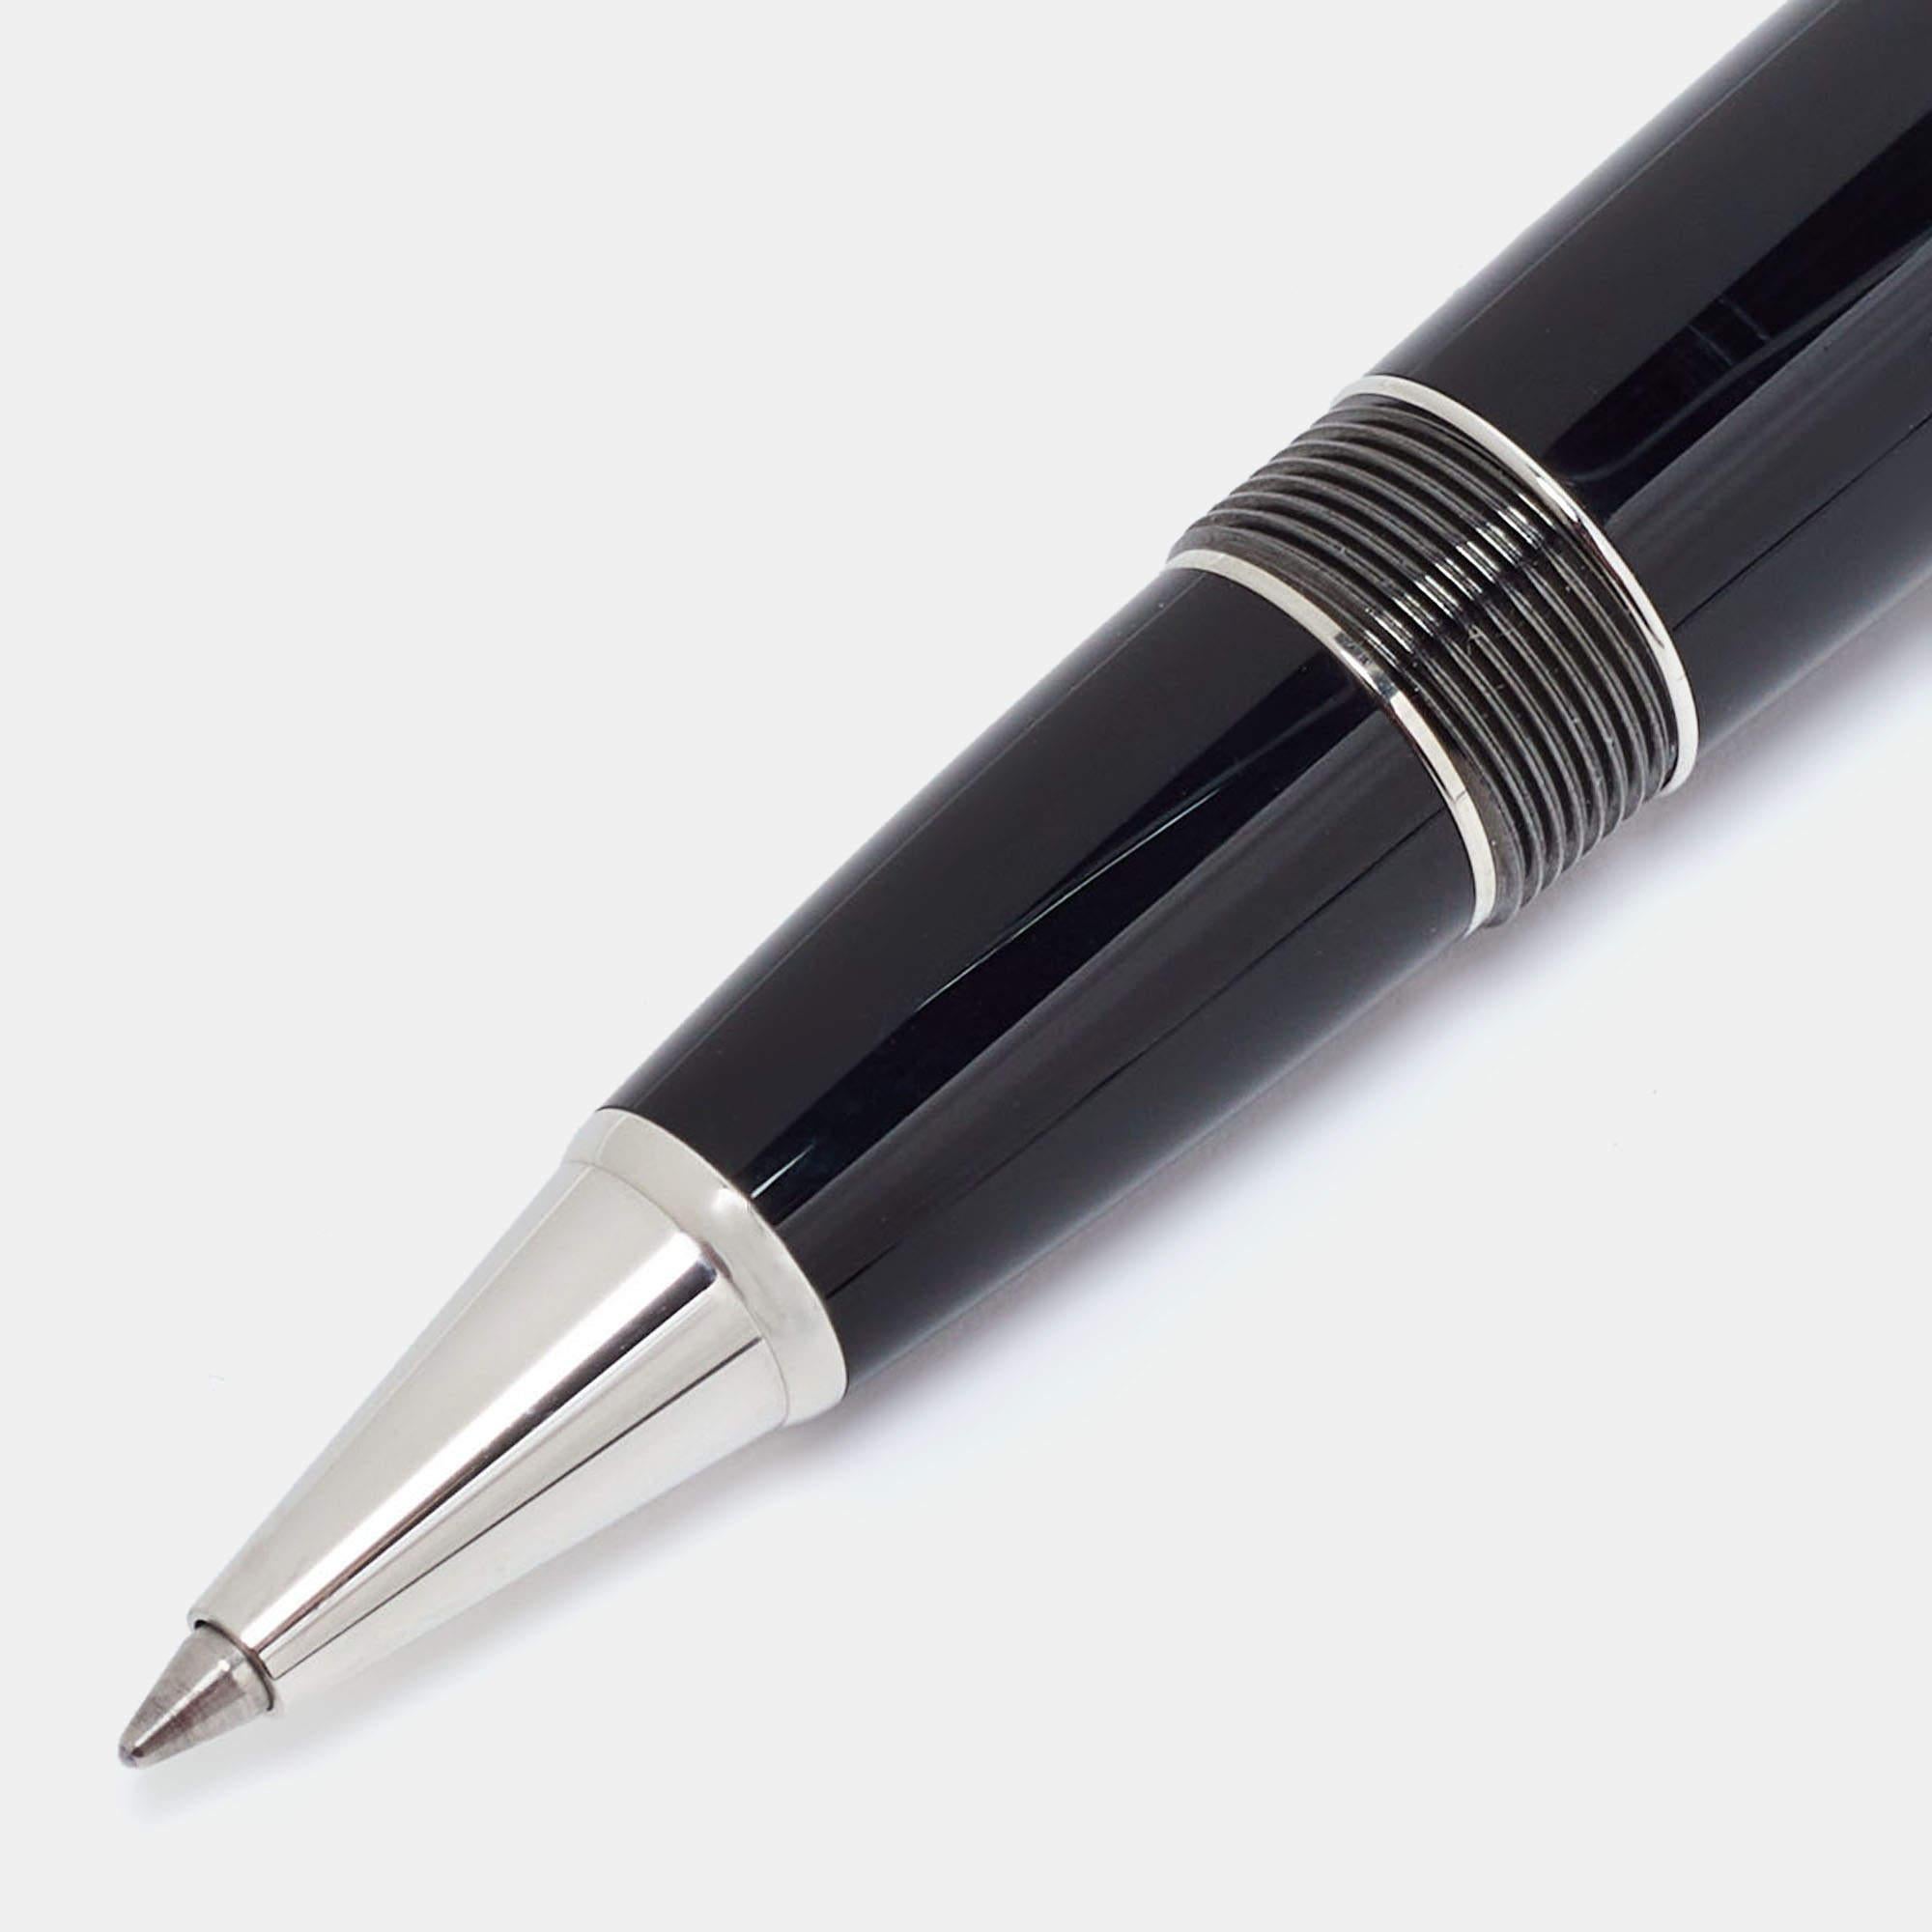 Montblanc's Meisterstück LeGrand rollerball pen is defined by quality craftsmanship. It has a sleek shape and just the right details to achieve a luxurious finish.

Includes
Original Case